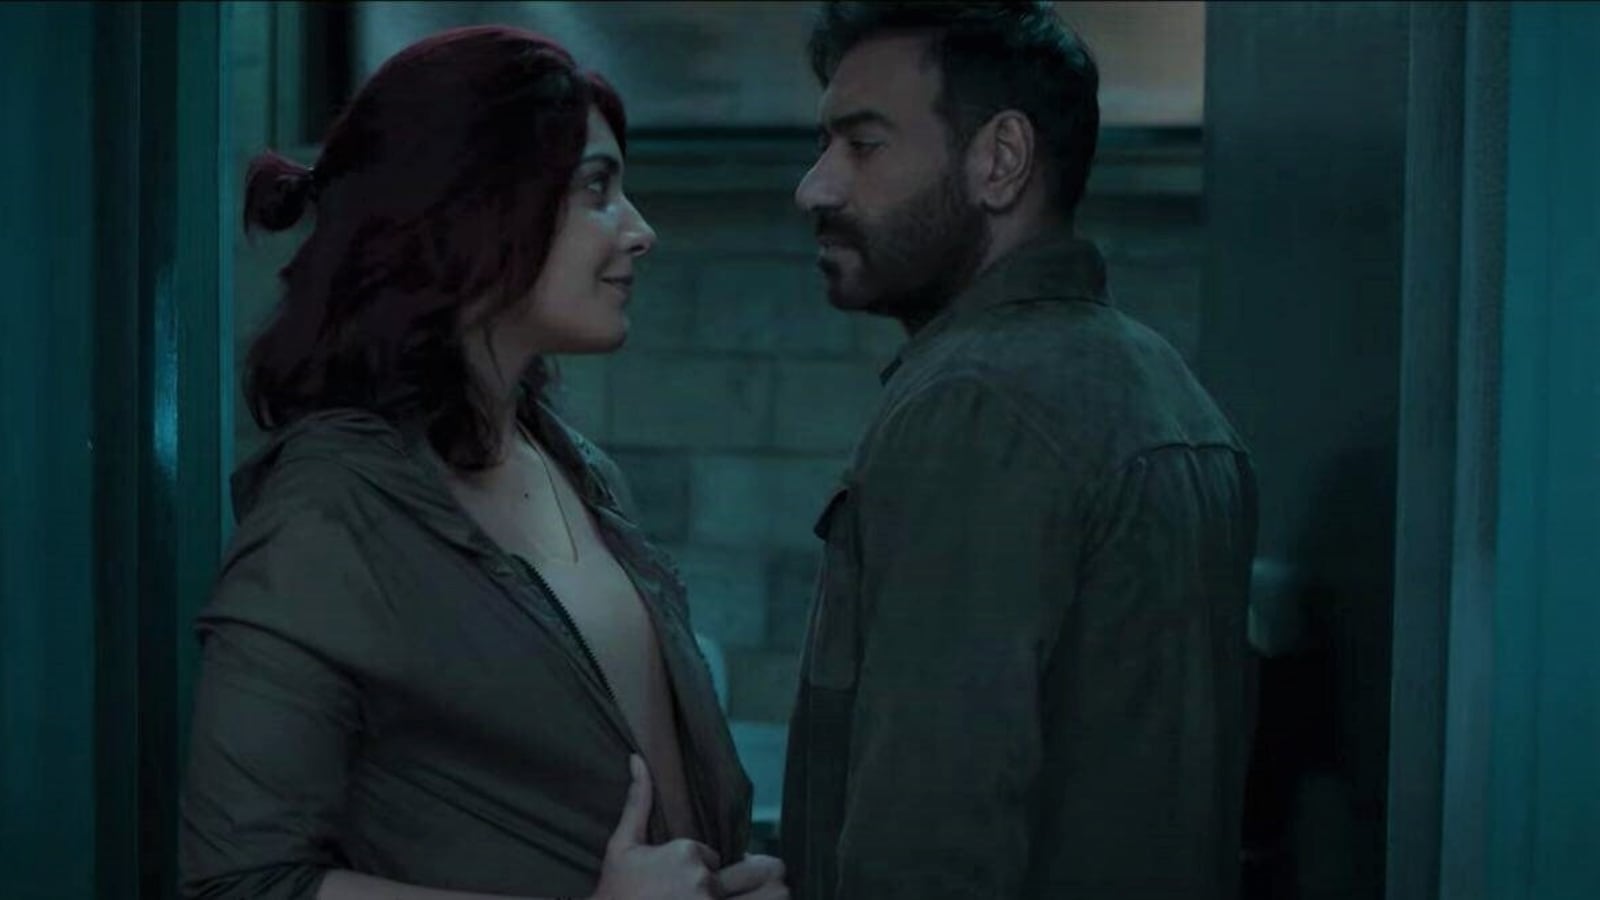 Rudra Review Ajay Devgn Is Superb In Well Made Crime Series Web Series Hindustan Times 7708